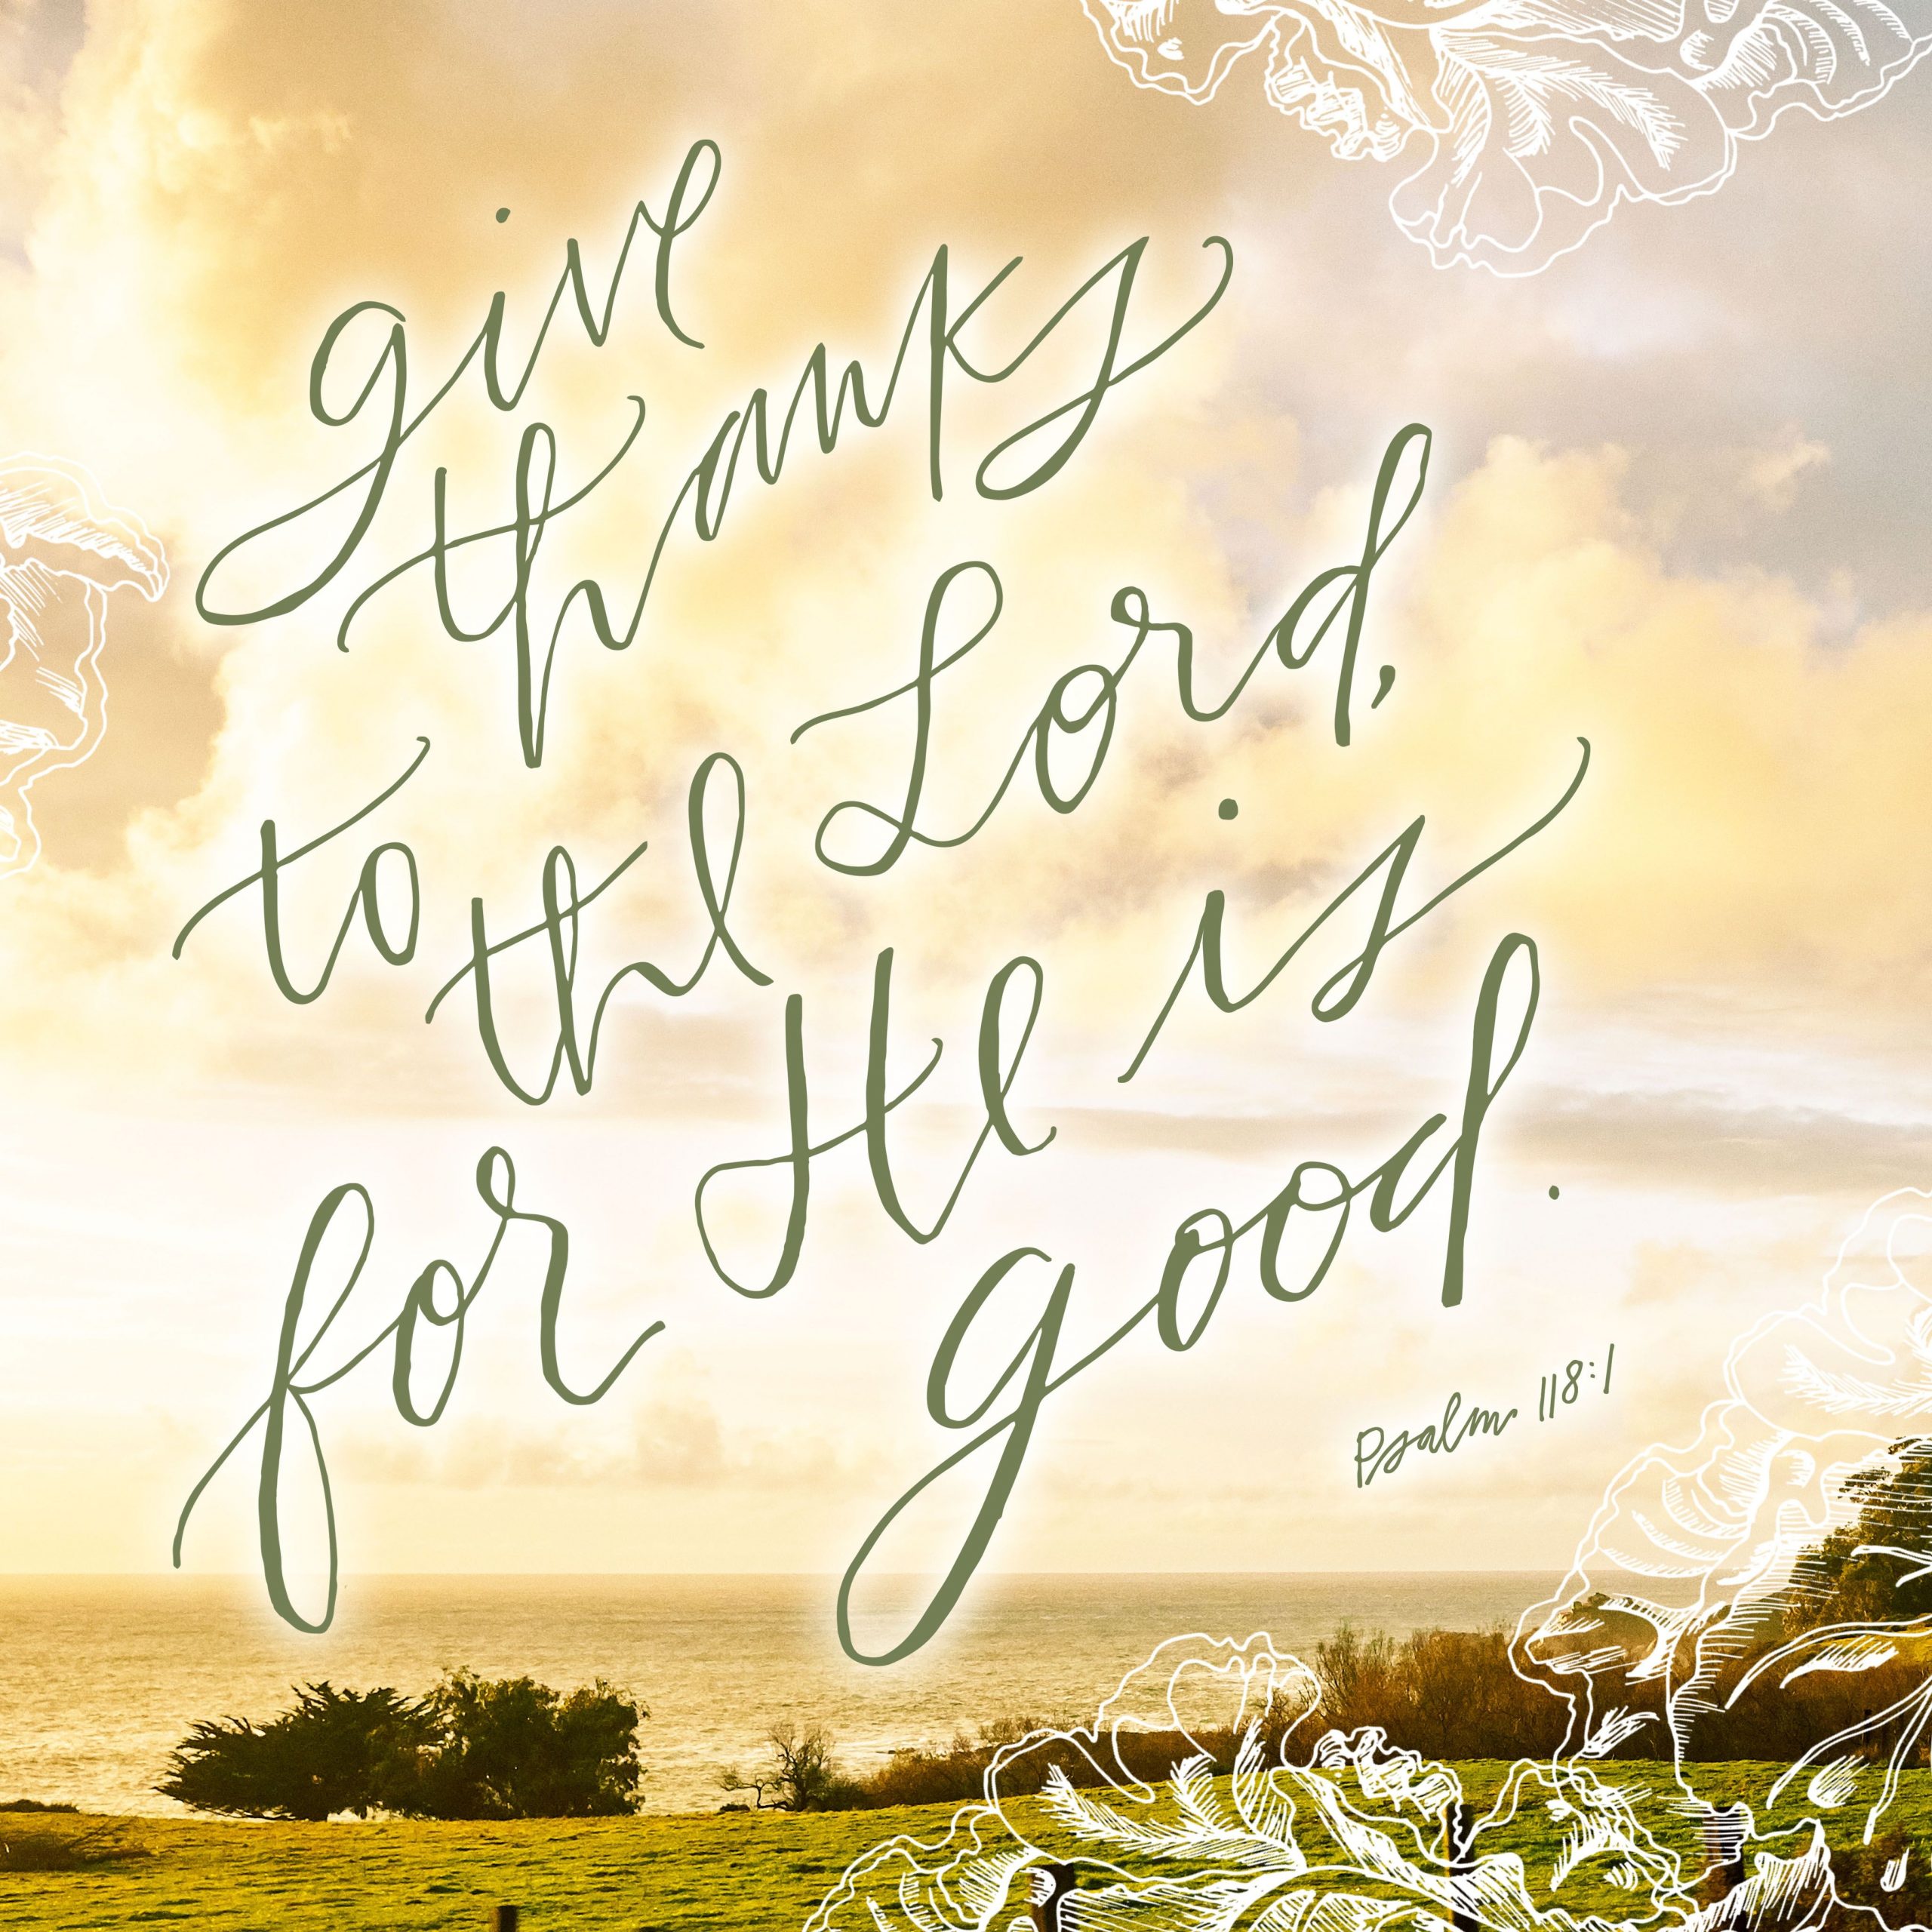 Give thanks to the Lord, for He is good. ~ Psalm 118:1